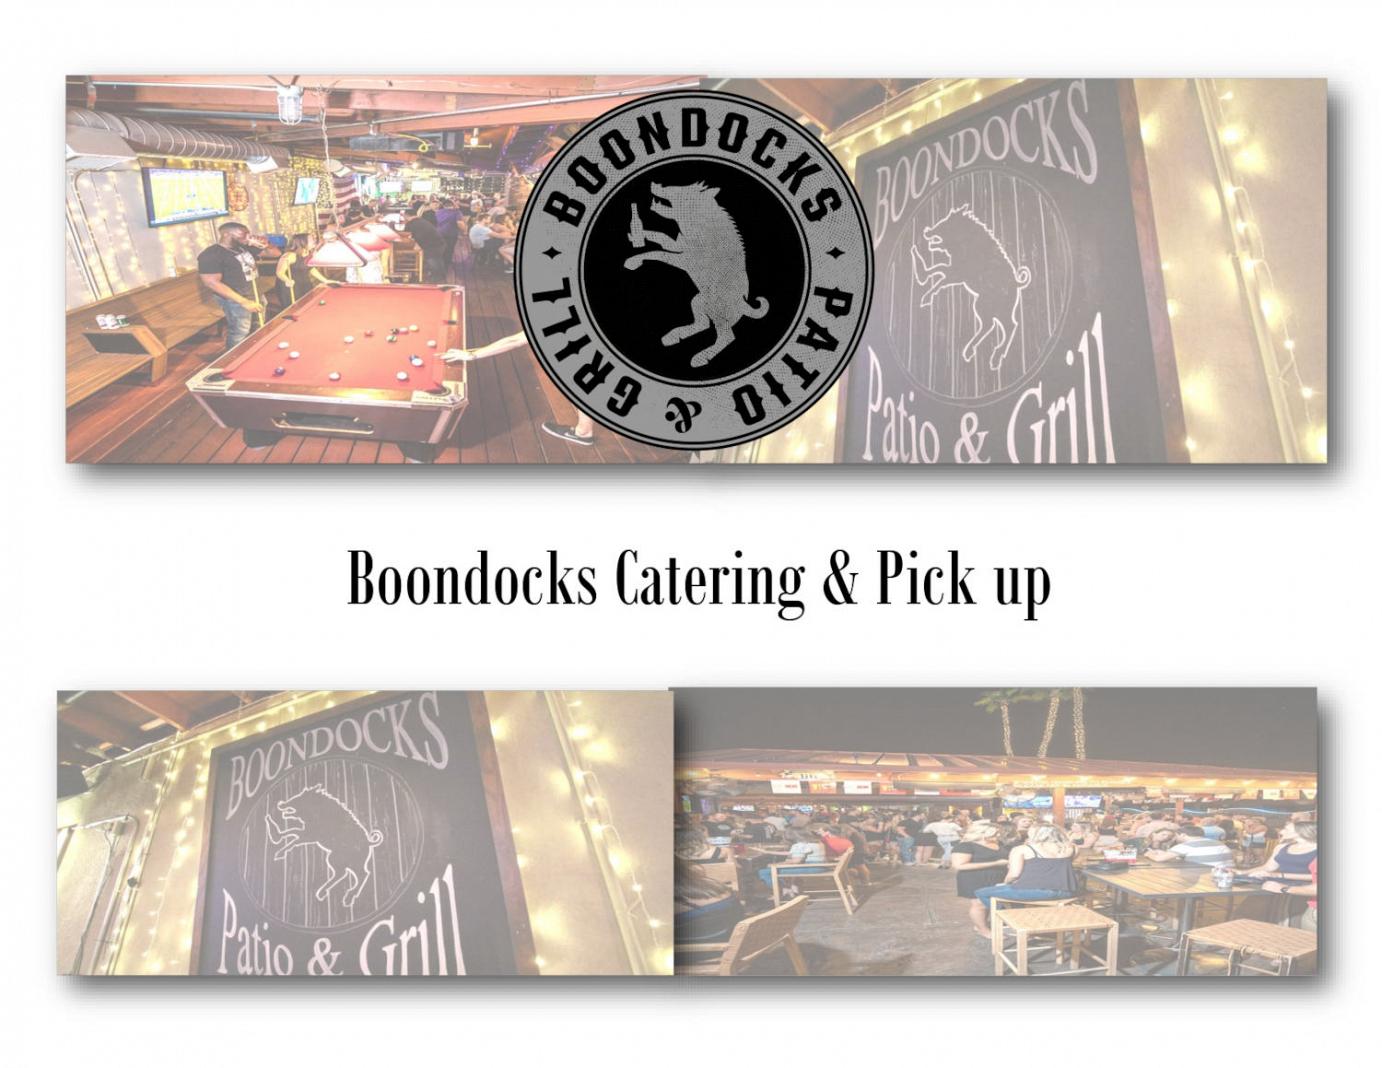 Boondocks Catering & Pick up